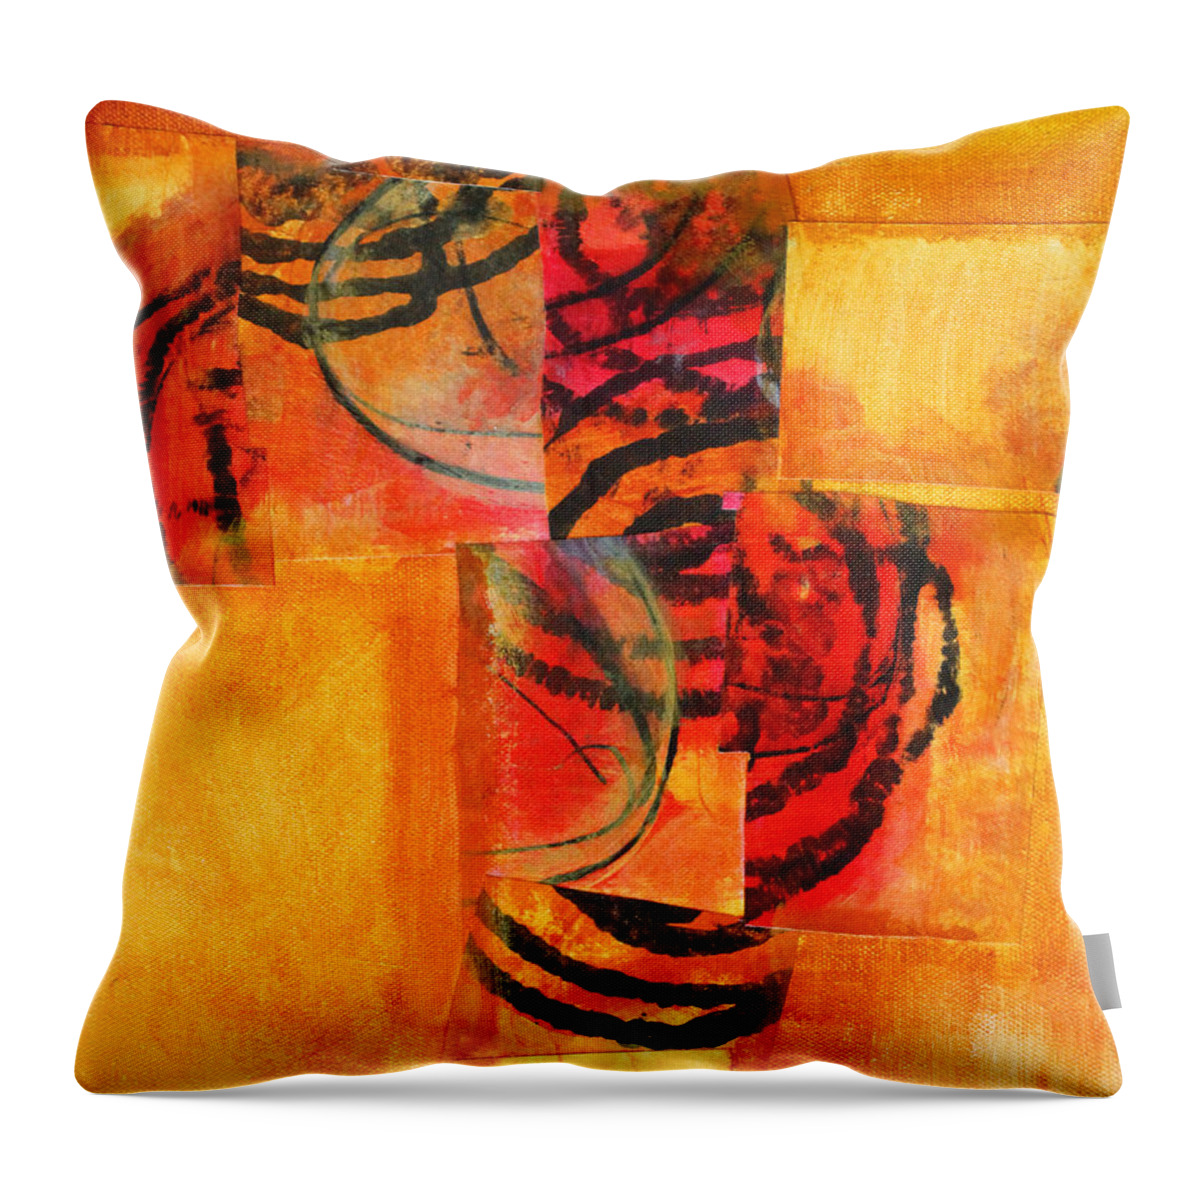 Abstract Throw Pillow featuring the painting Circles Squared by Nancy Merkle